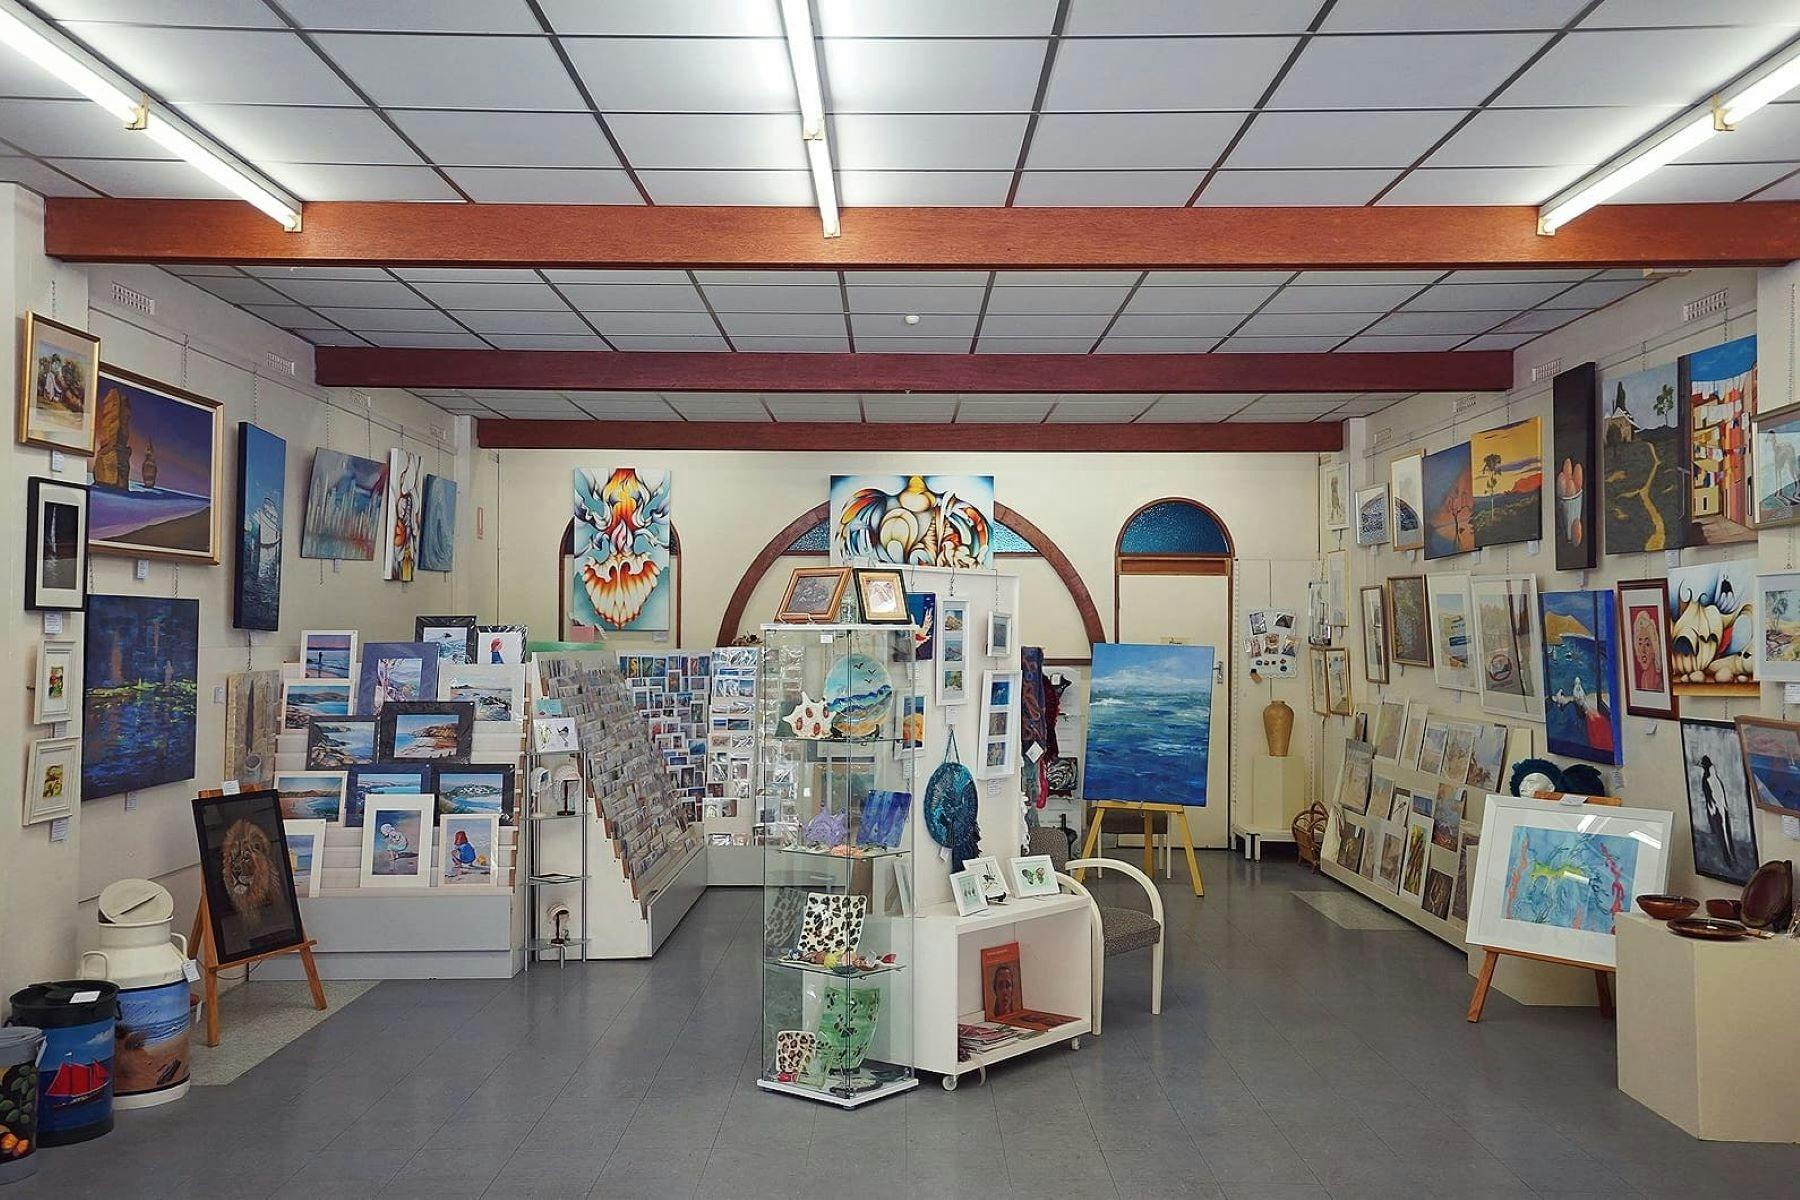 artwork and displays in a gallery space